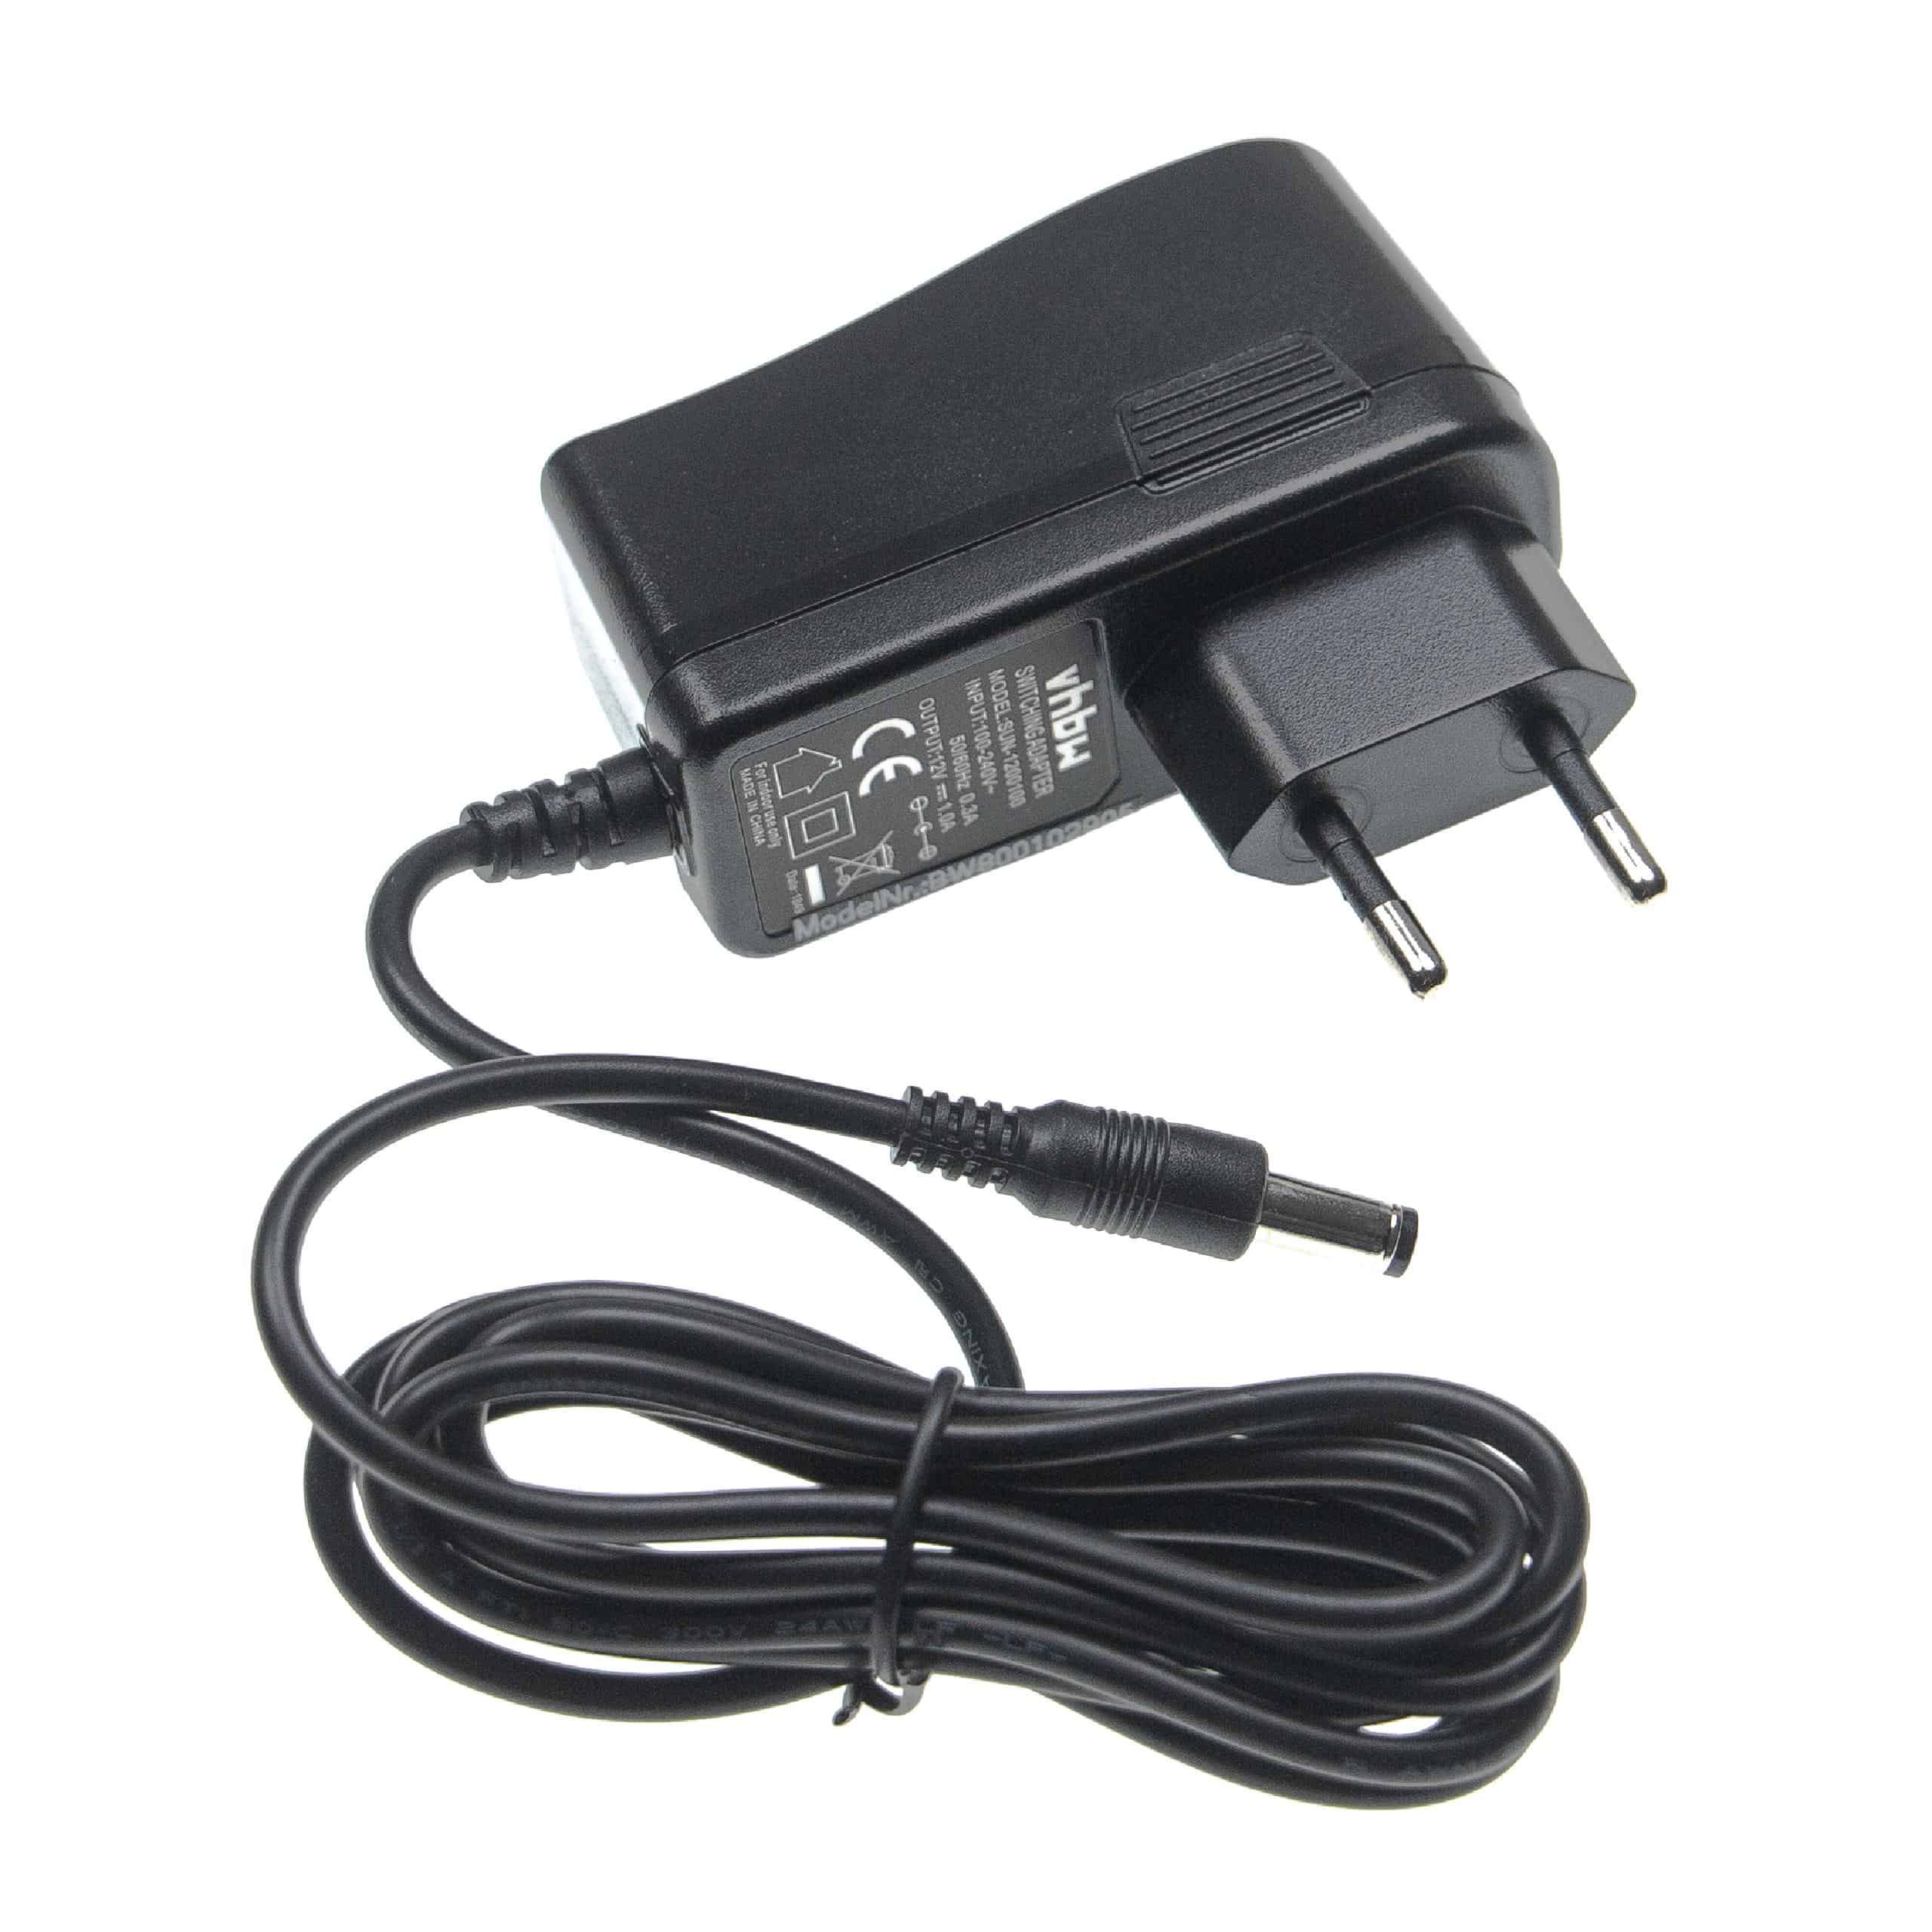 Mains Power Adapter replaces AVM 311POW165, 311POW134 for Electric Devices - 115 cm 12 V / 1 A